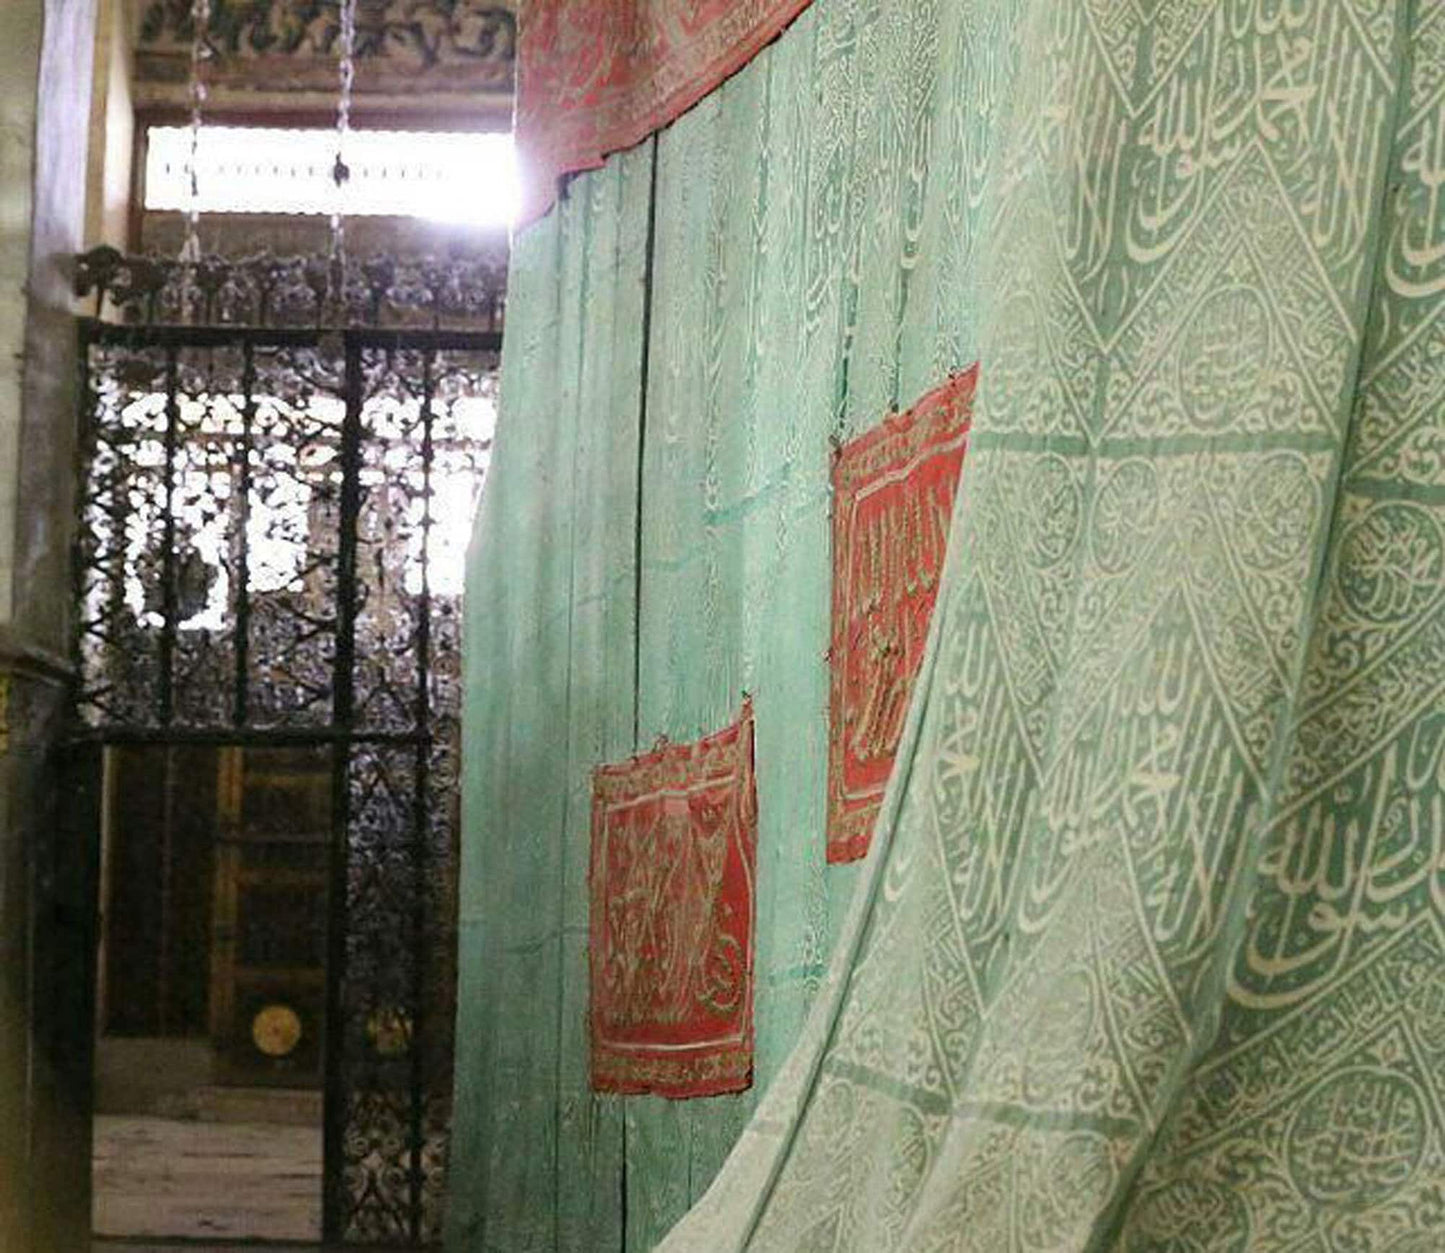 The Grave & Tomb of the Prophet Muhammad ﷺ (The Sacred Chamber) The Green Cover Cloth